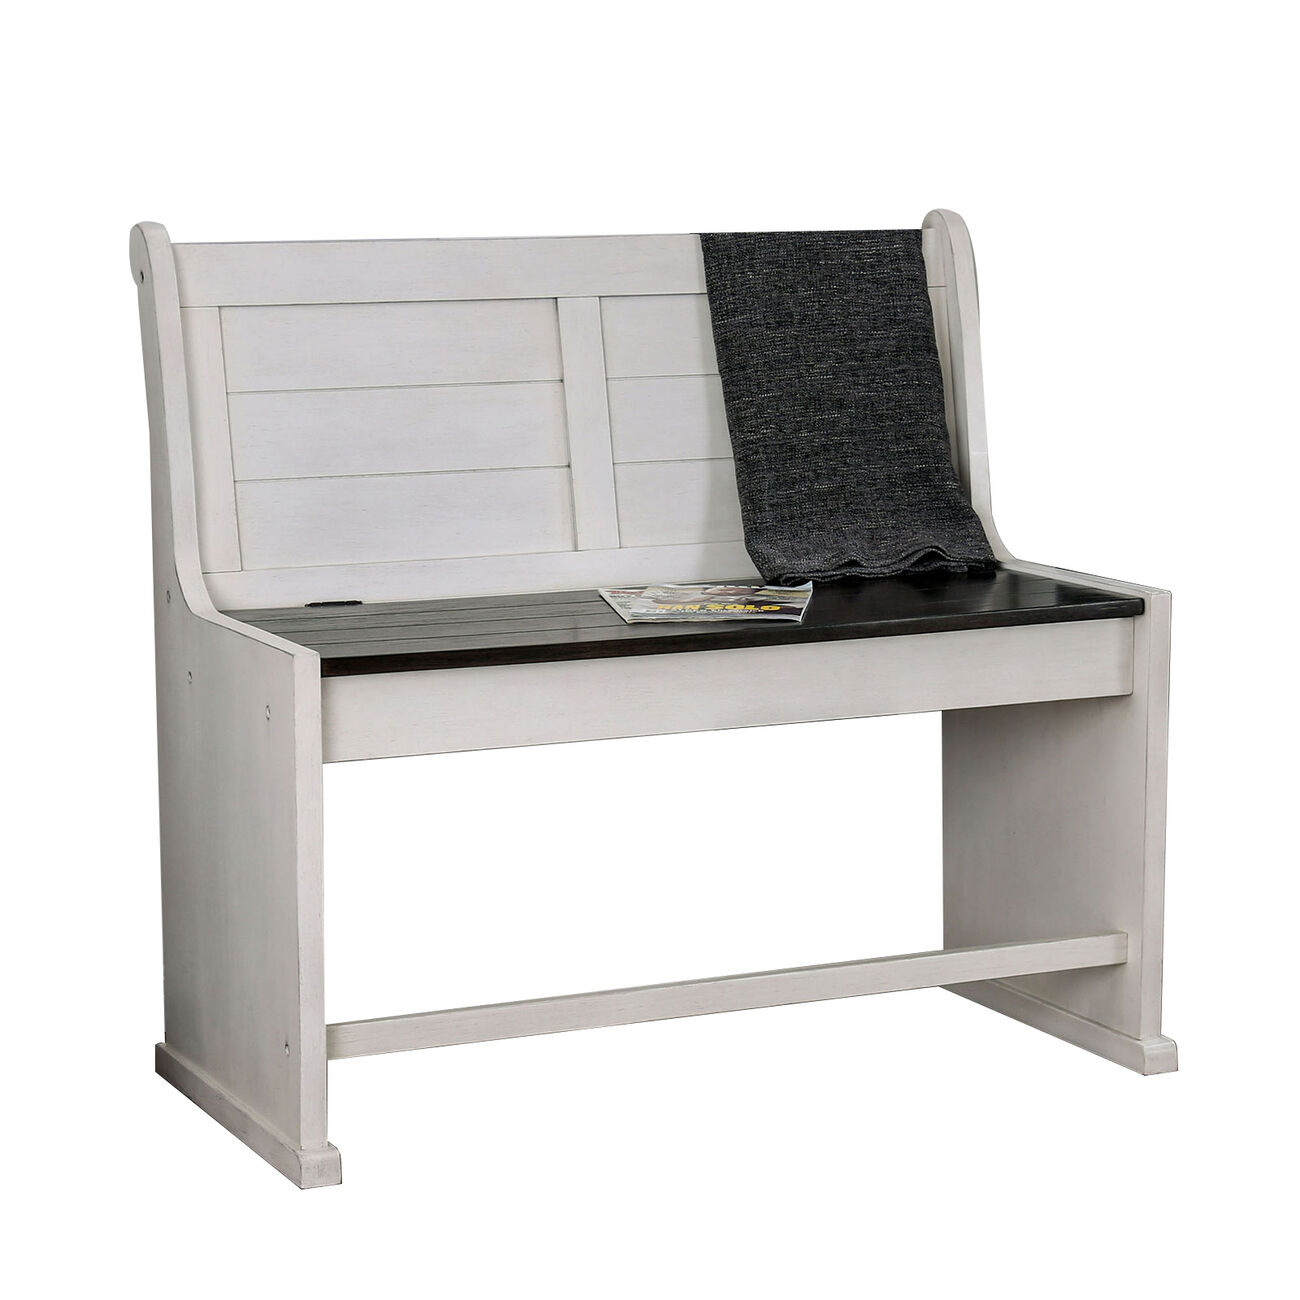 Wooden Counter Height Bench with Lift Top Seat, White and Black